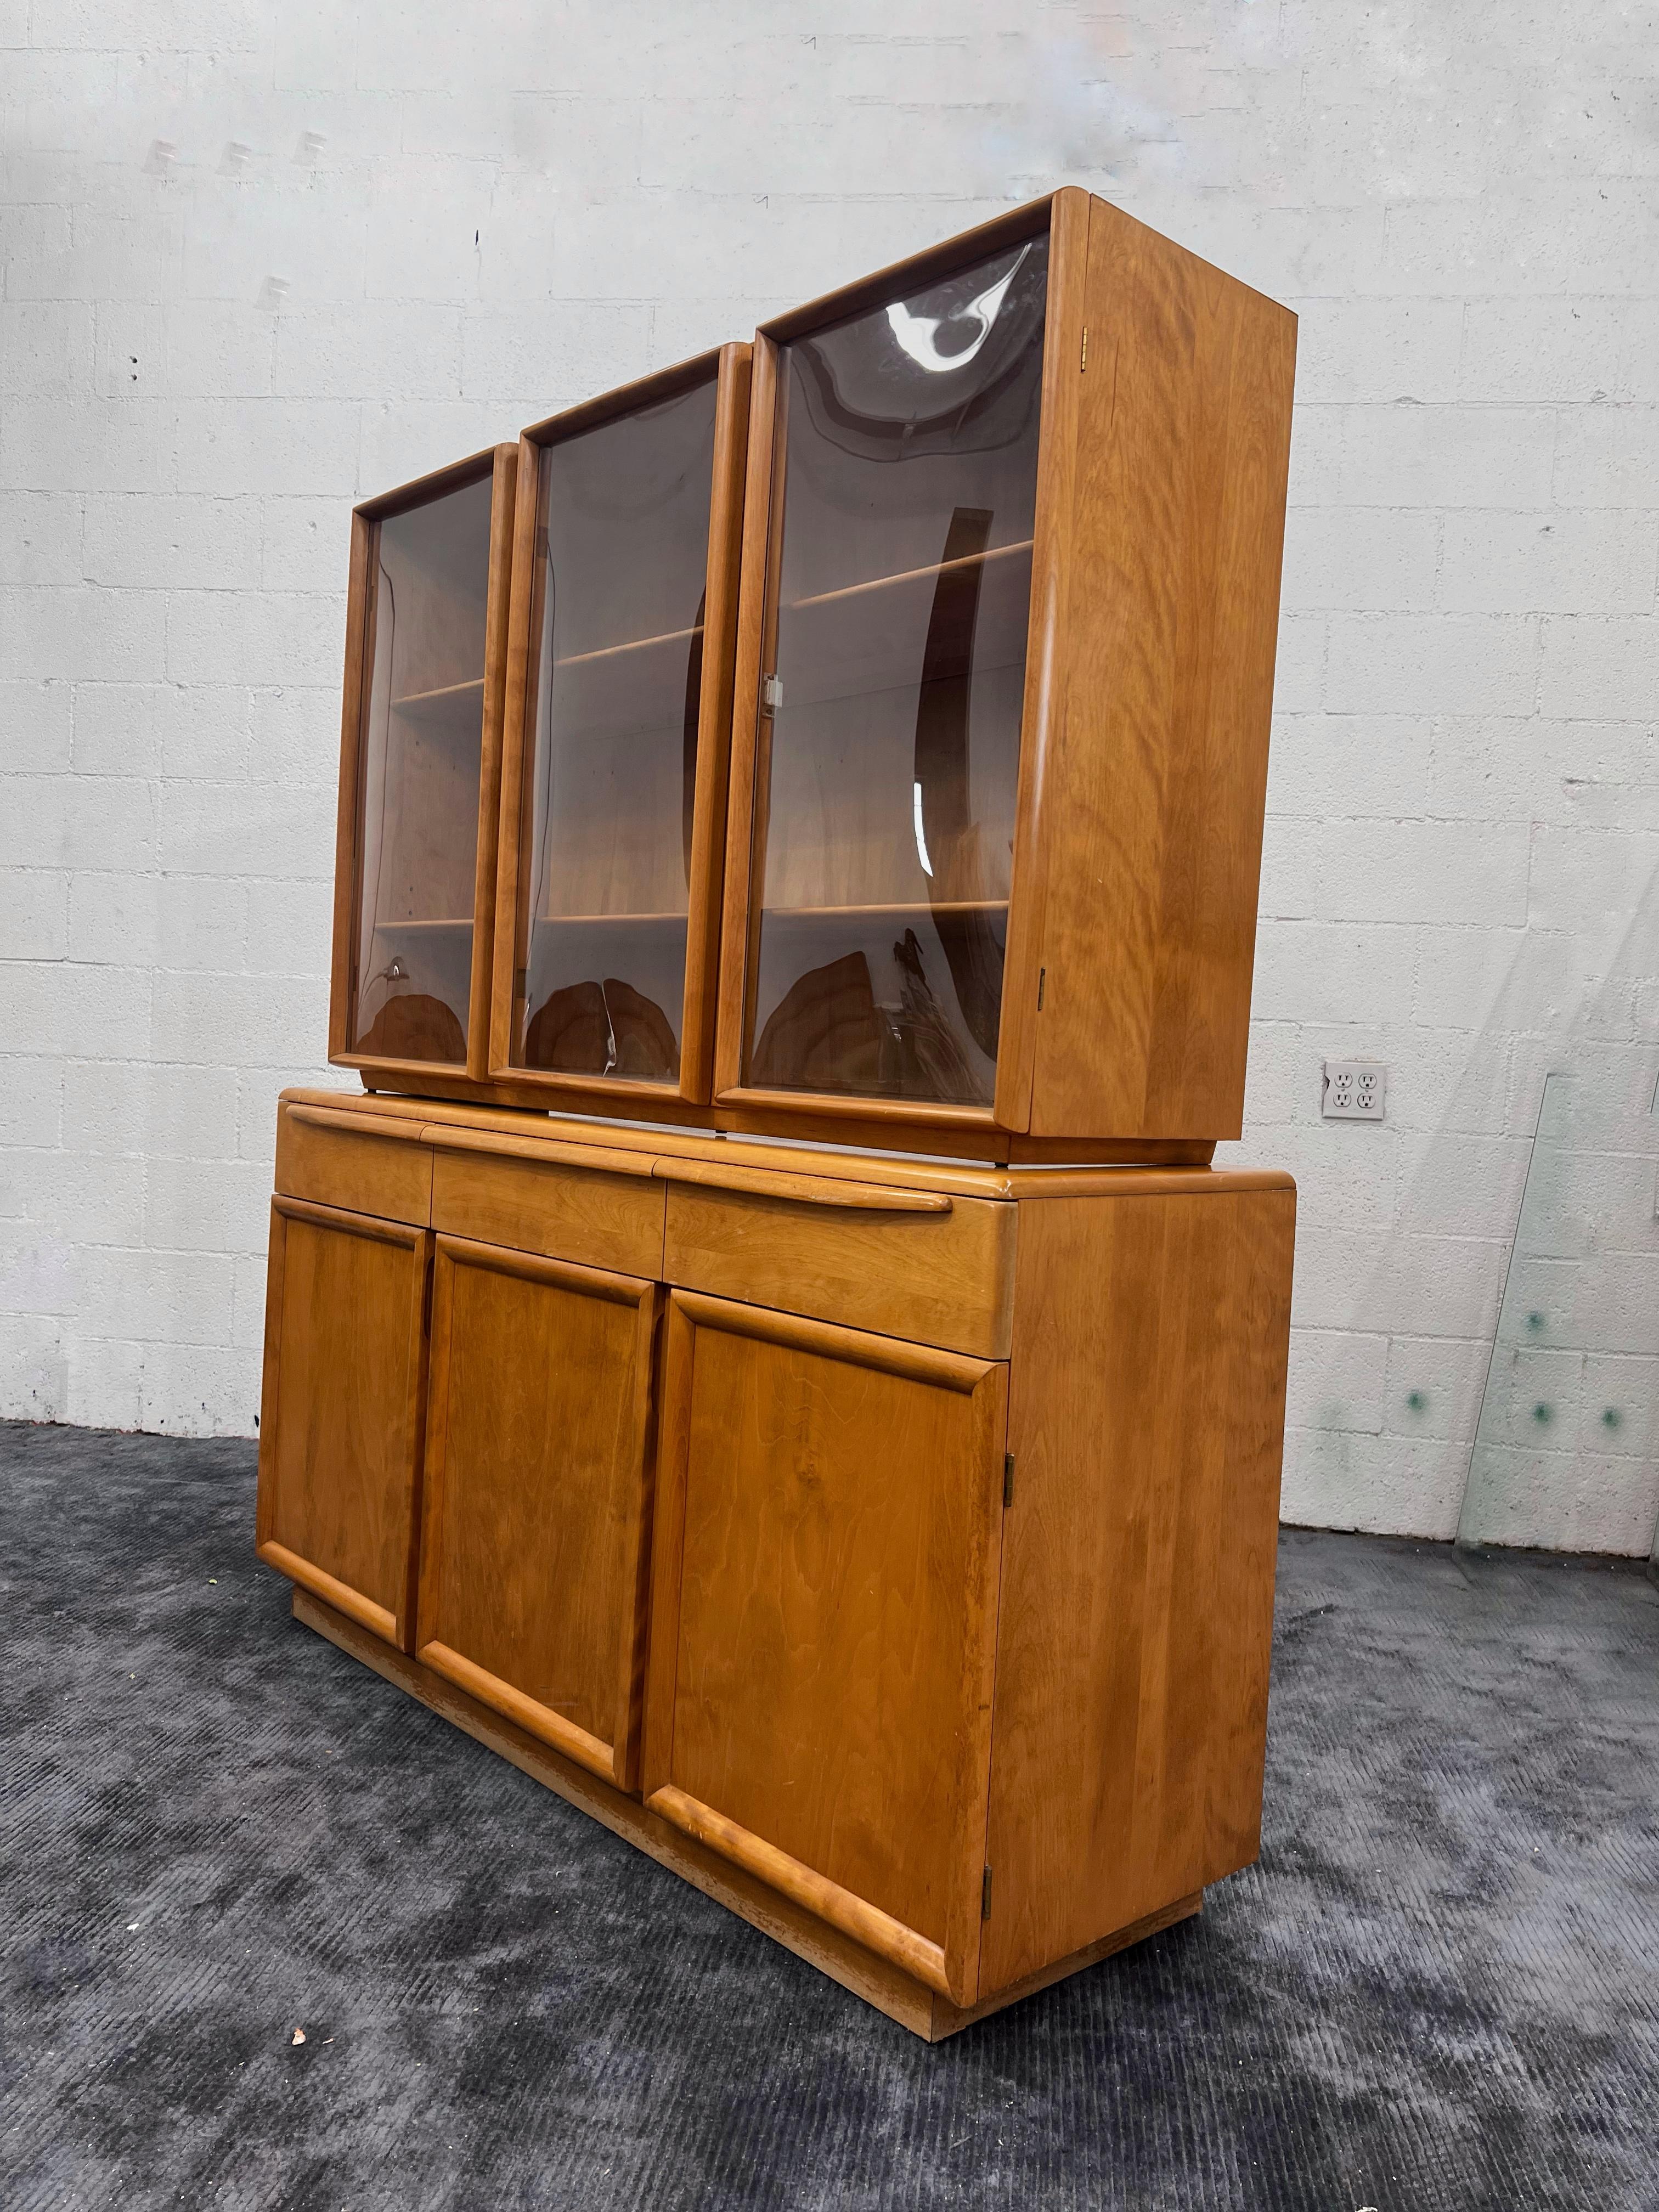 Mid-Century Modern Heywood Wakefield two-part china cabinet, circa 1955. The original finish has aged to a dark amber / tobacco color. 
The top cabinet has three bubbled glass doors that open to reveal shelves. The bottom cabinet has two drawers